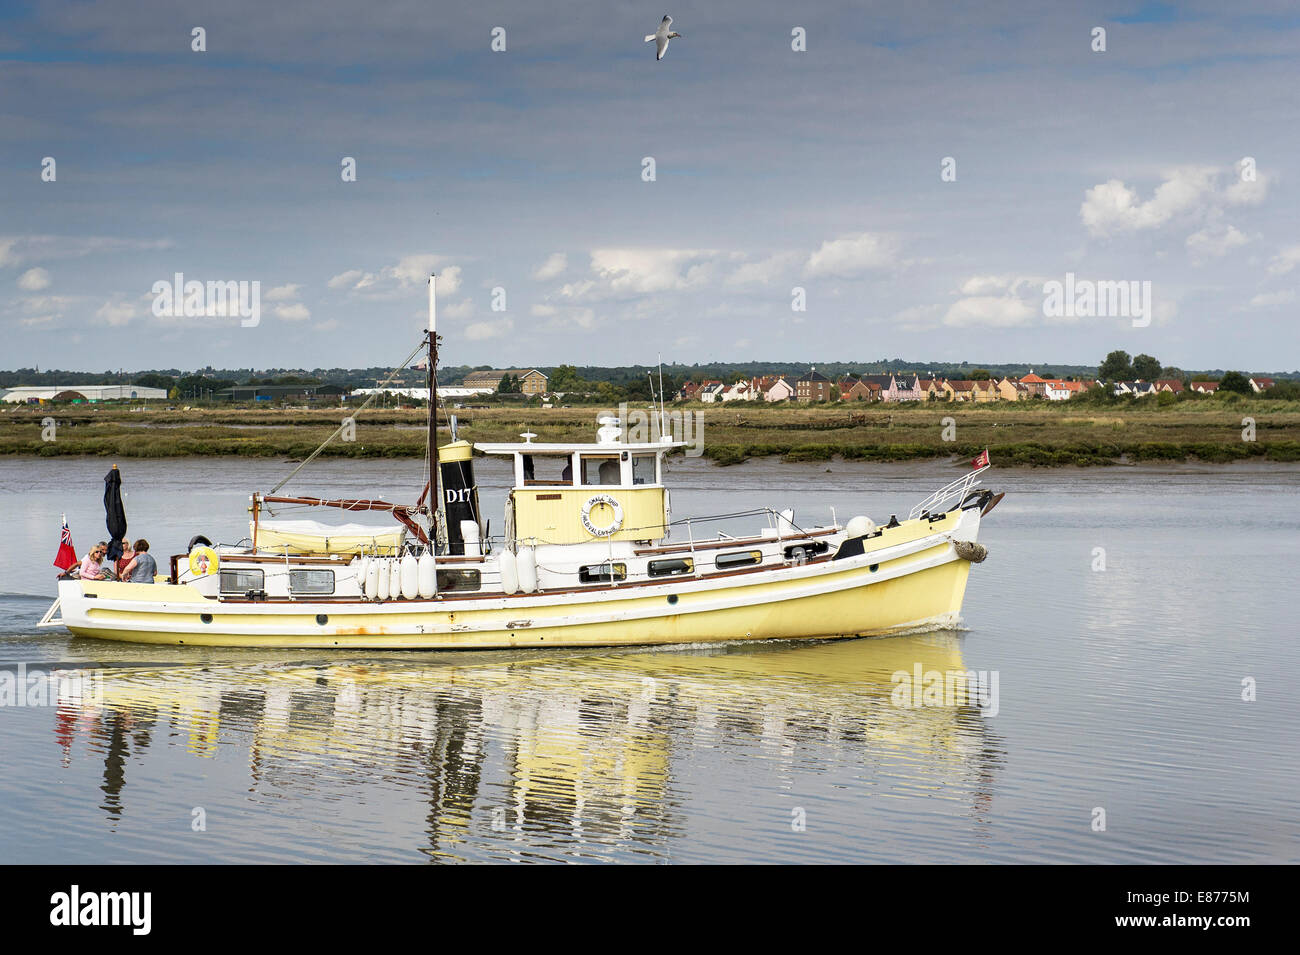 A Small Ship Valentine on the Blackwater River in Essex. Stock Photo